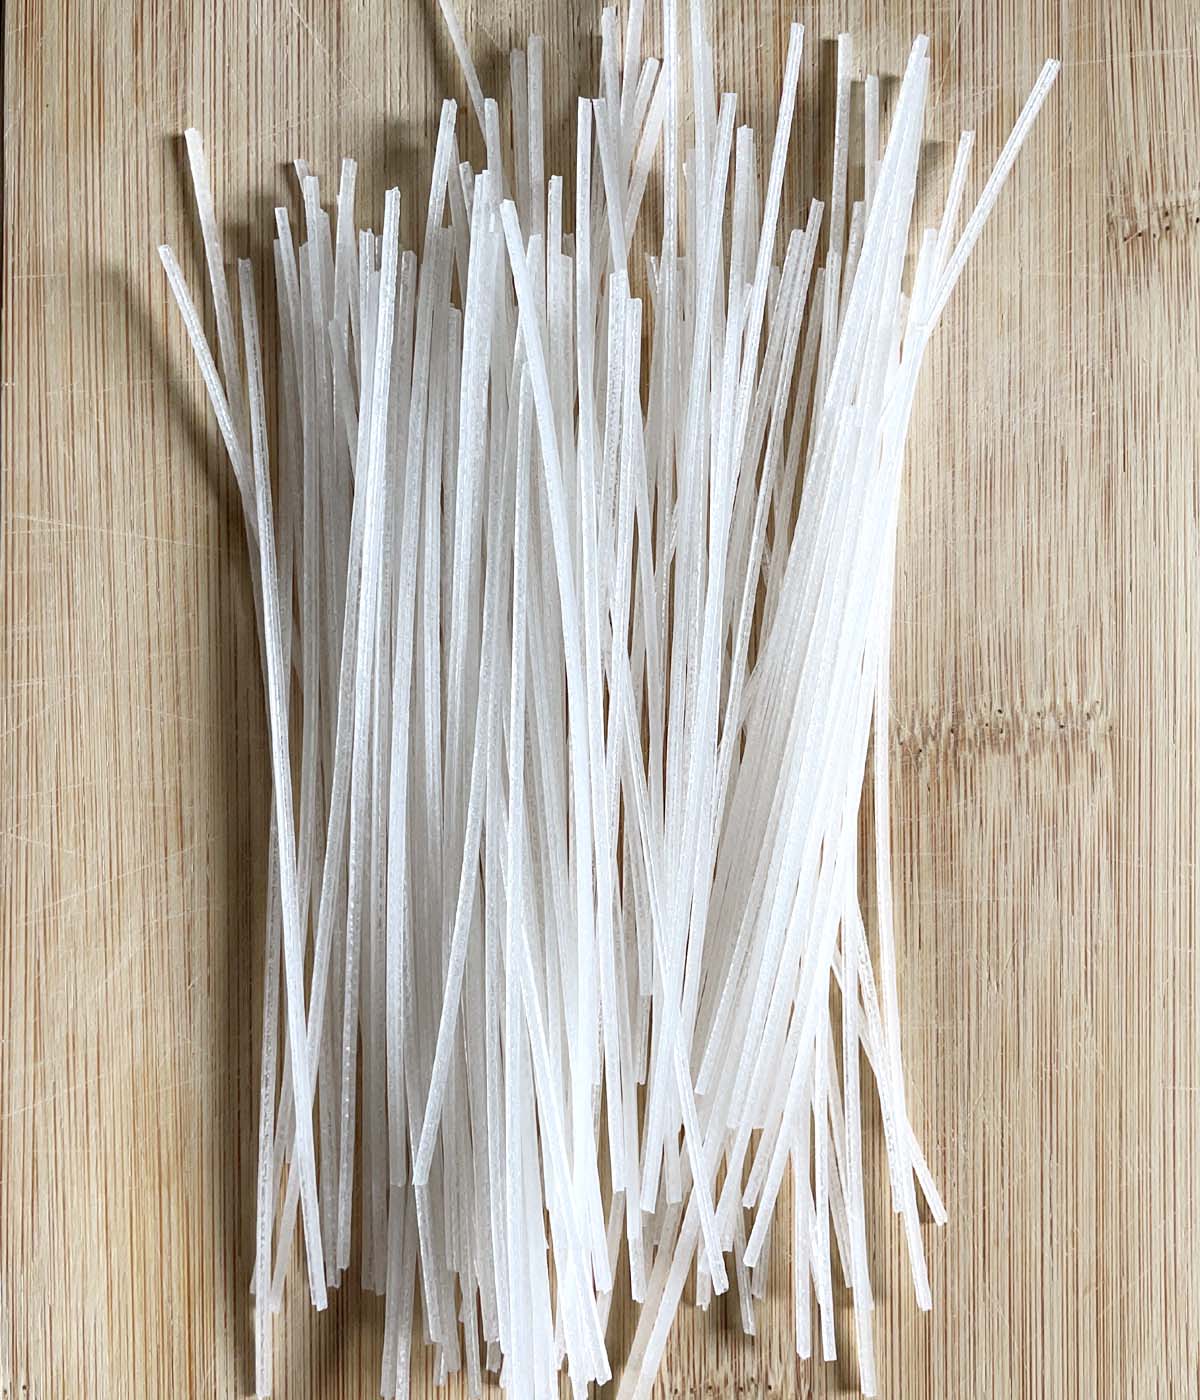 Dry white noodle sticks for making sunomono noodle salad on a wooden cutting board.